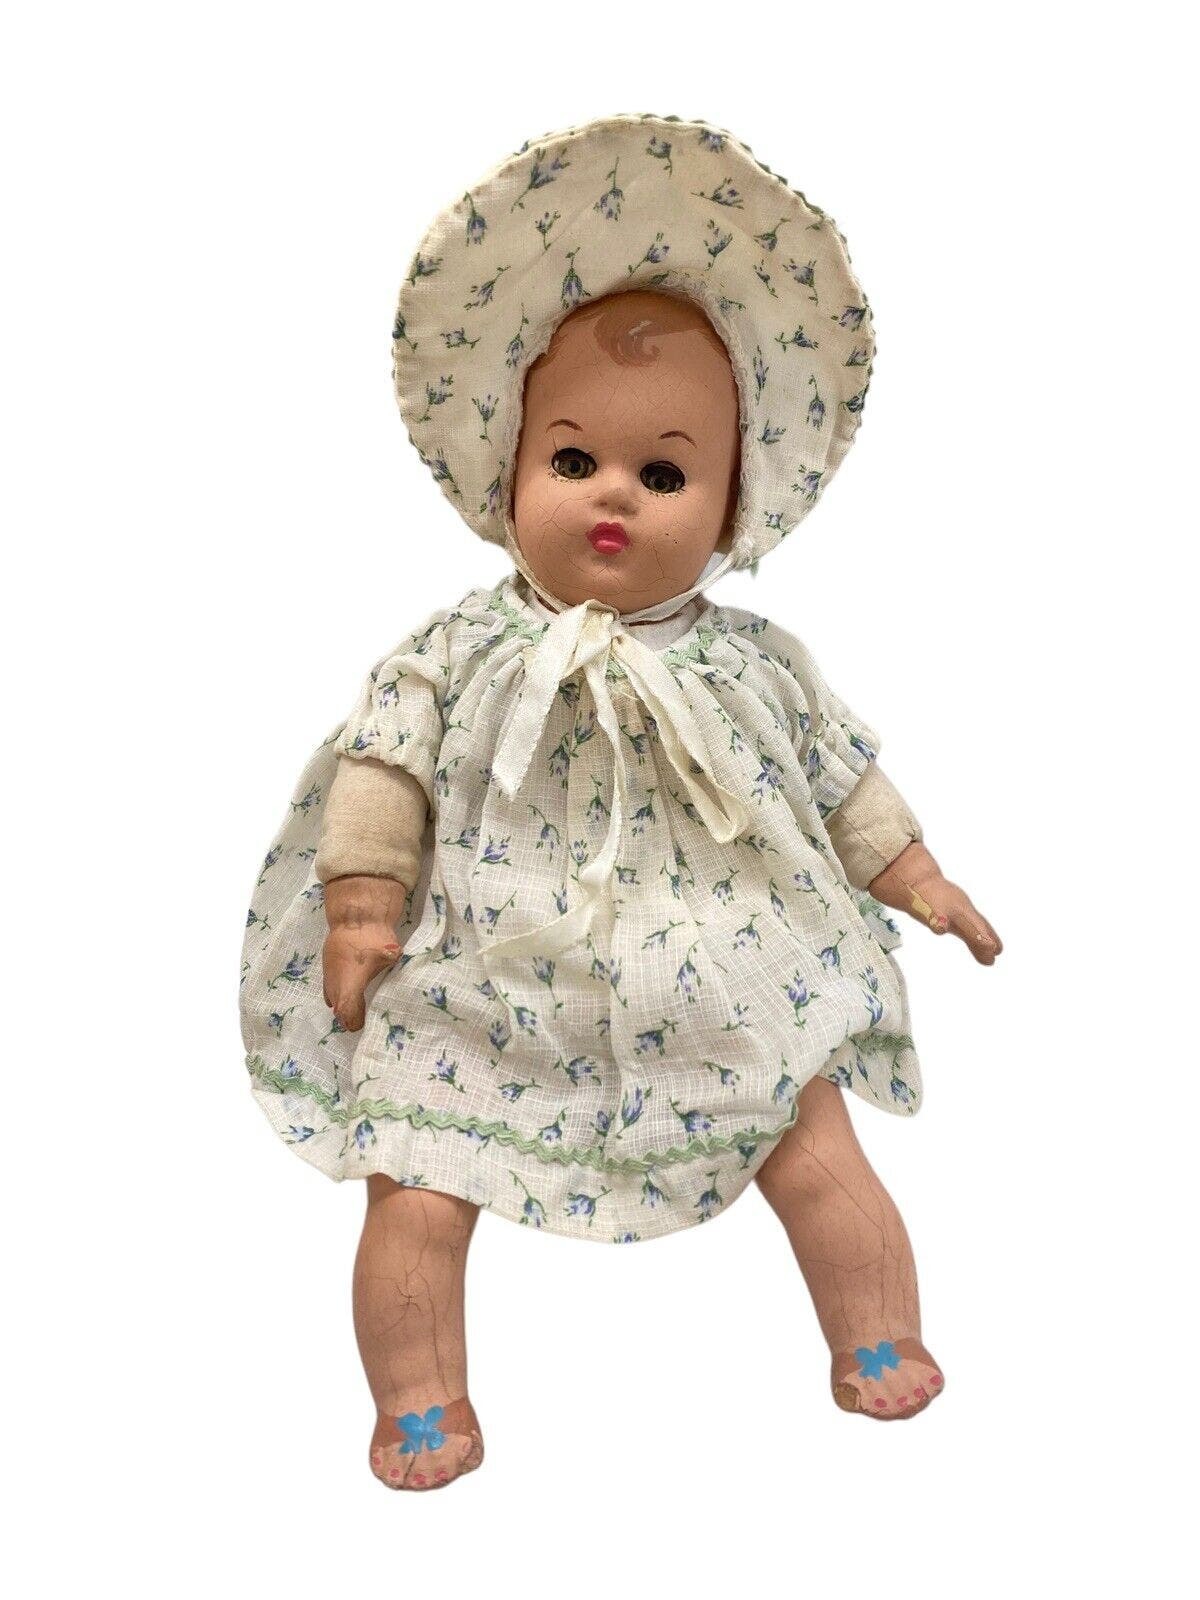 1930's Madam Alexander Sleepy GREEN eyes 11" composition doll in original outfit - $79.19